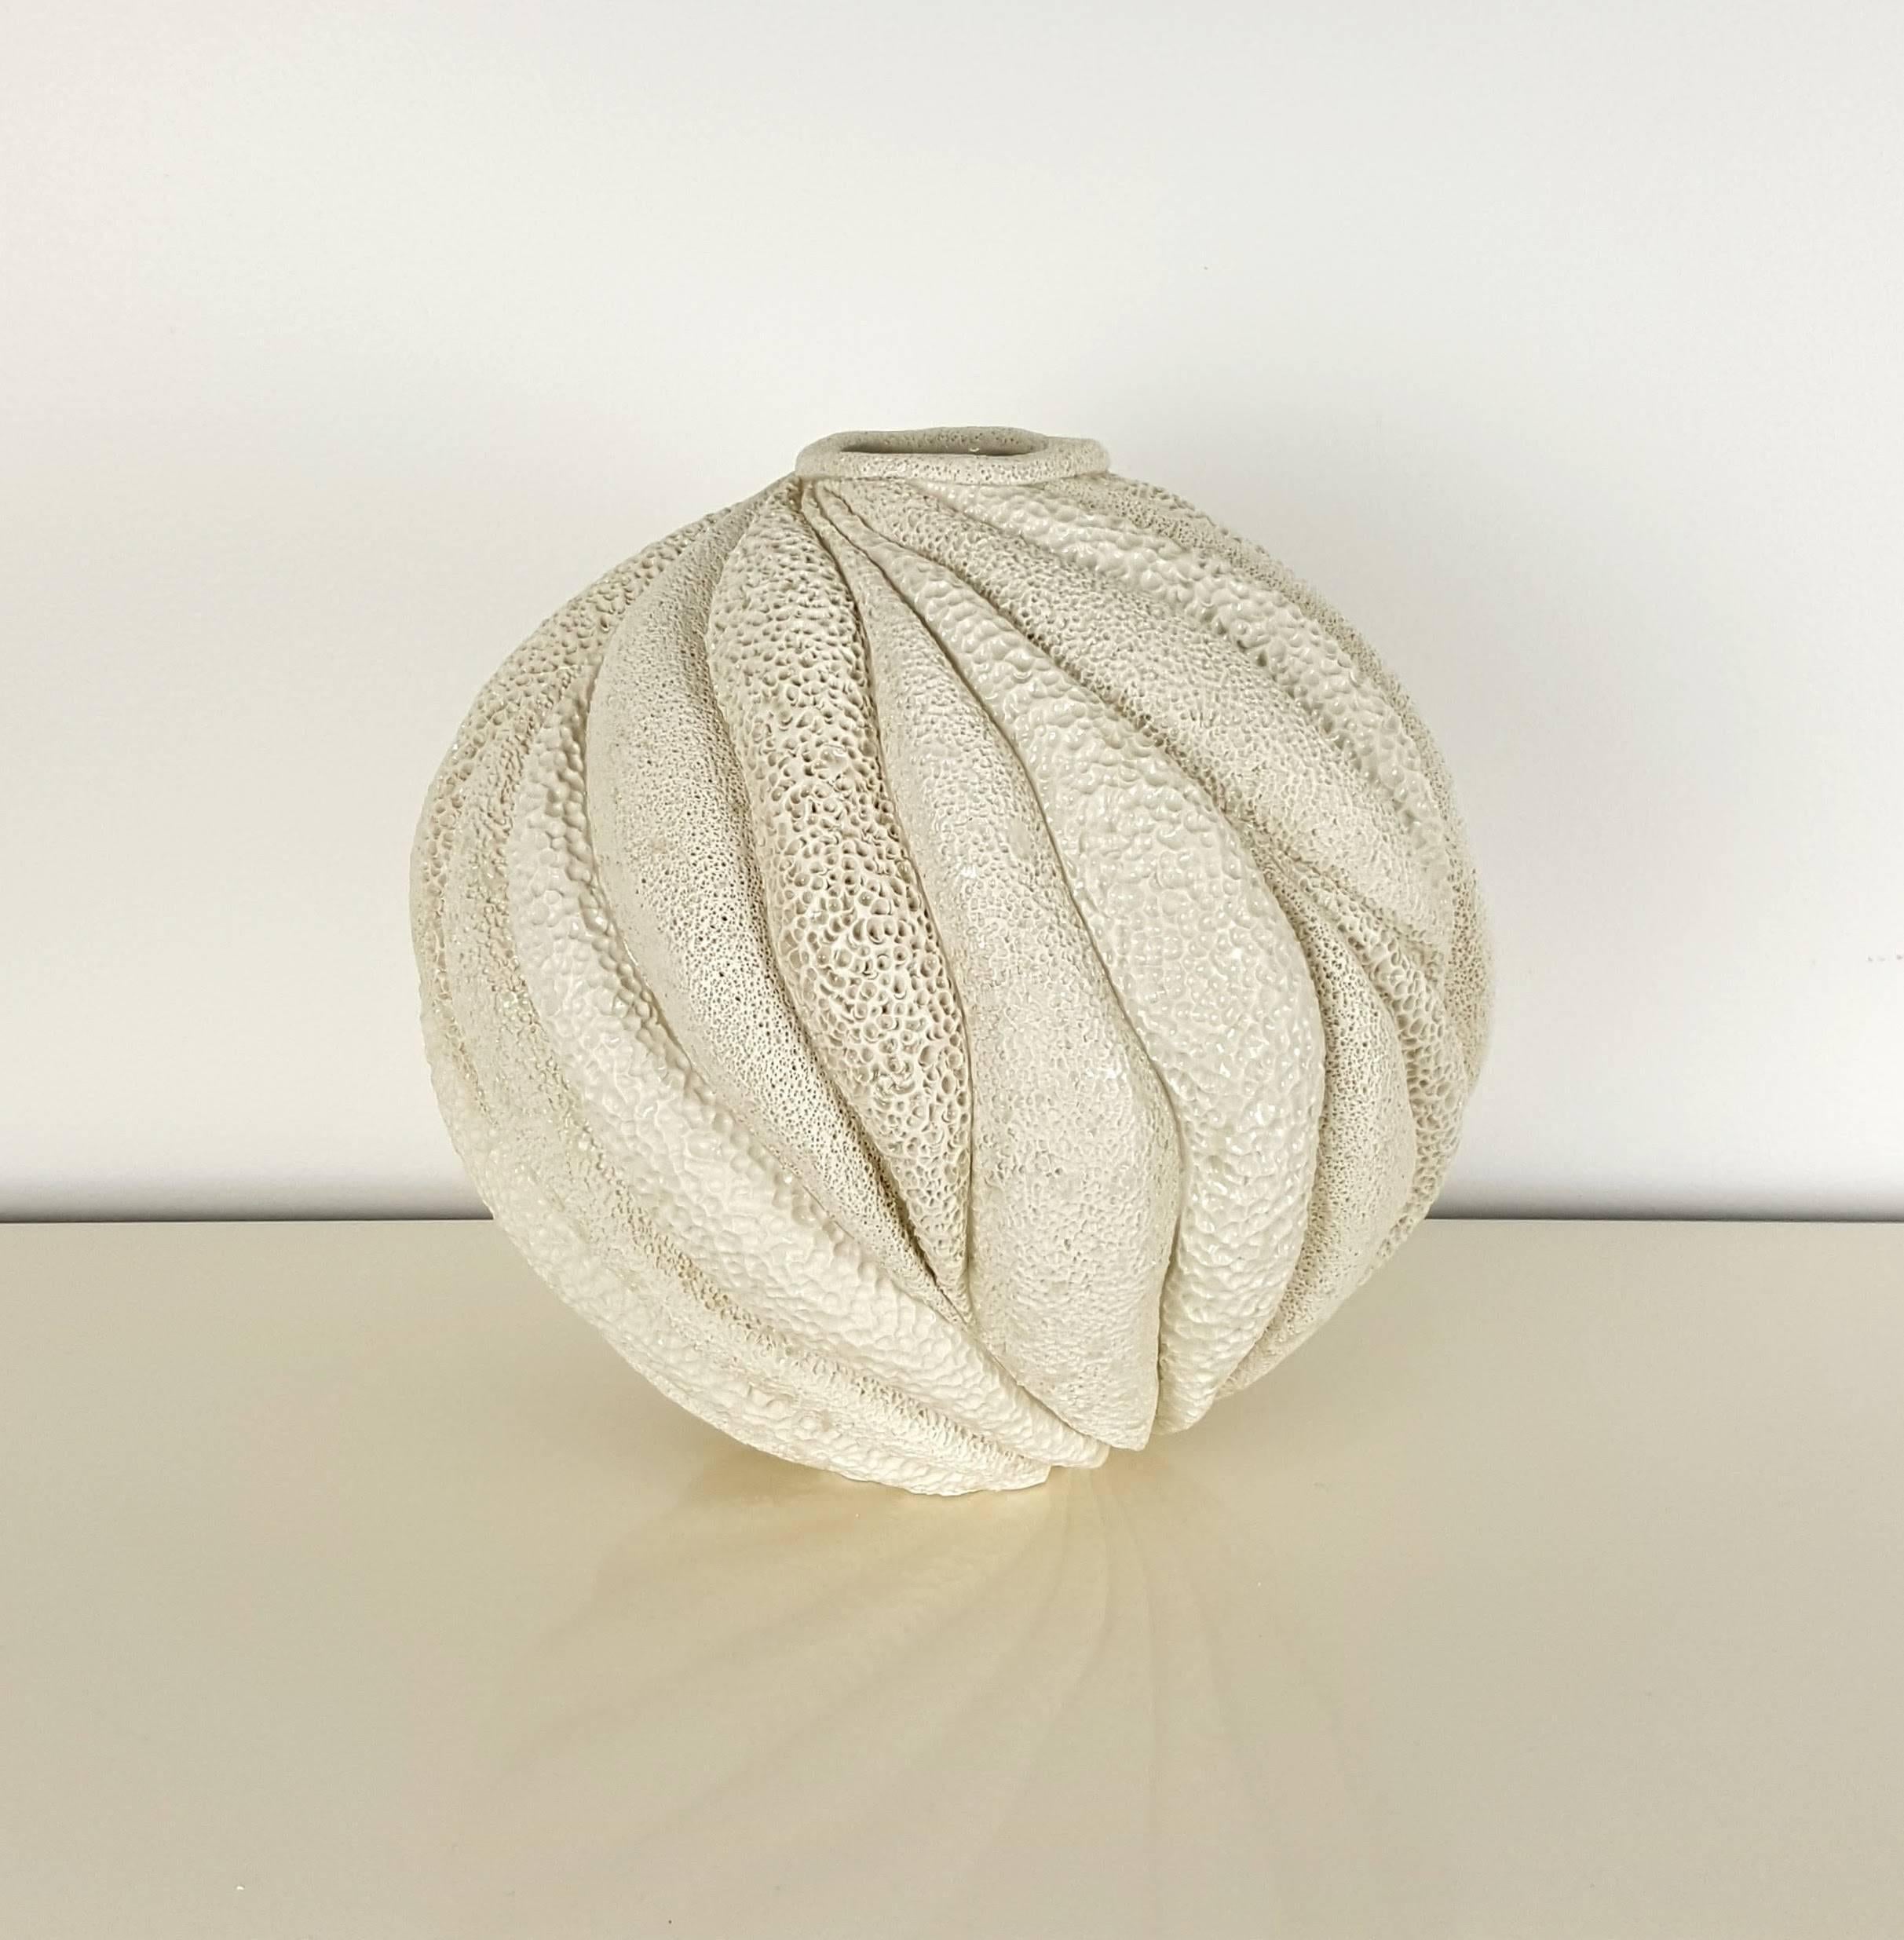 Creamy white large round coastal collage vessel by Judi Tavill, 2016. Hand thrown. The carved pieces are created with thick walls, deeply carved and painstakingly textured by hand. Pieces are coated with porcelain slip and further textured. After